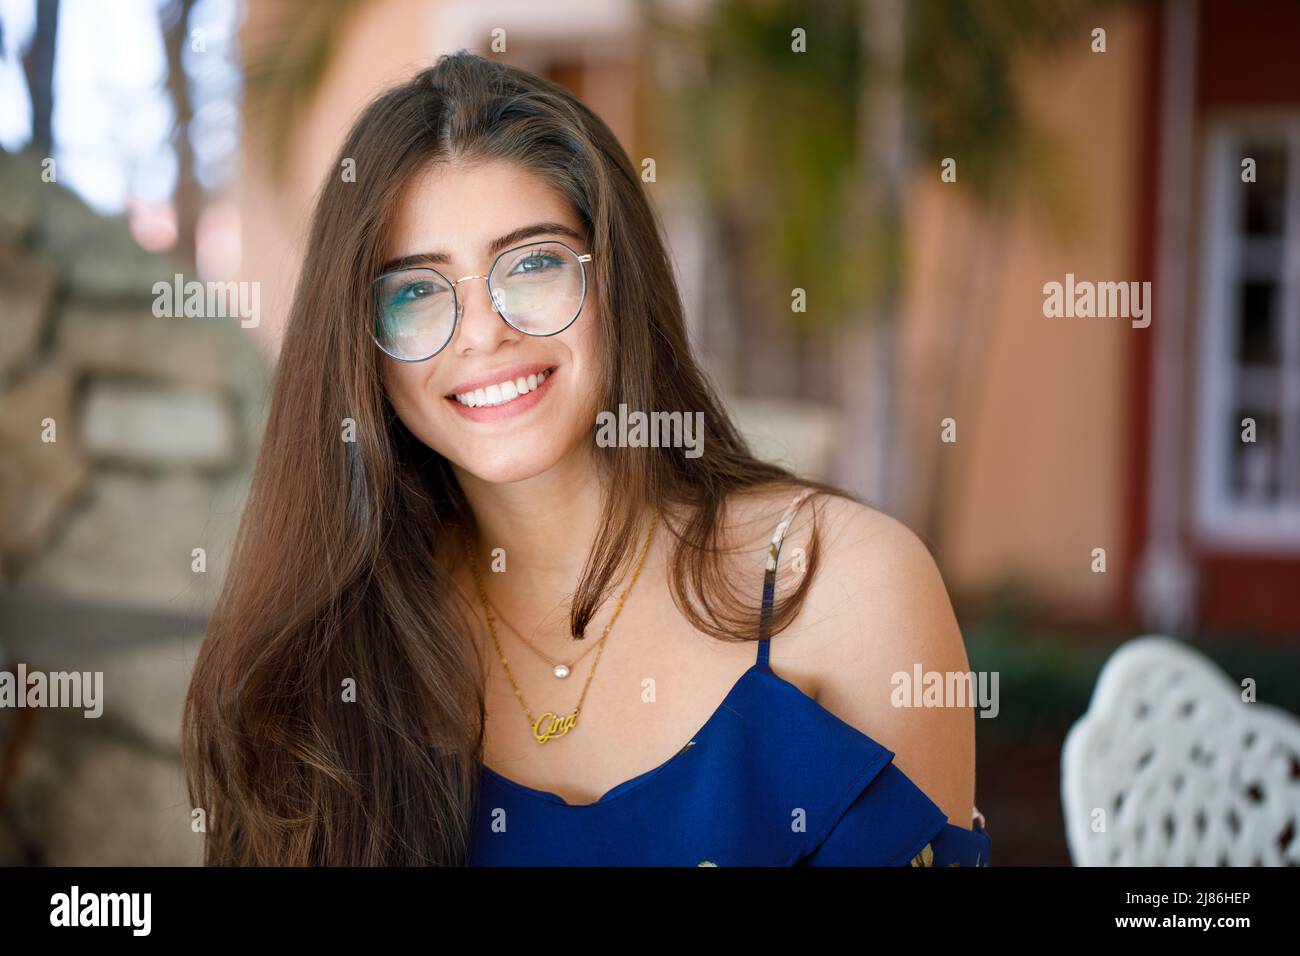 A young Latin American woman looks into the camera and smiles. Stock Photo